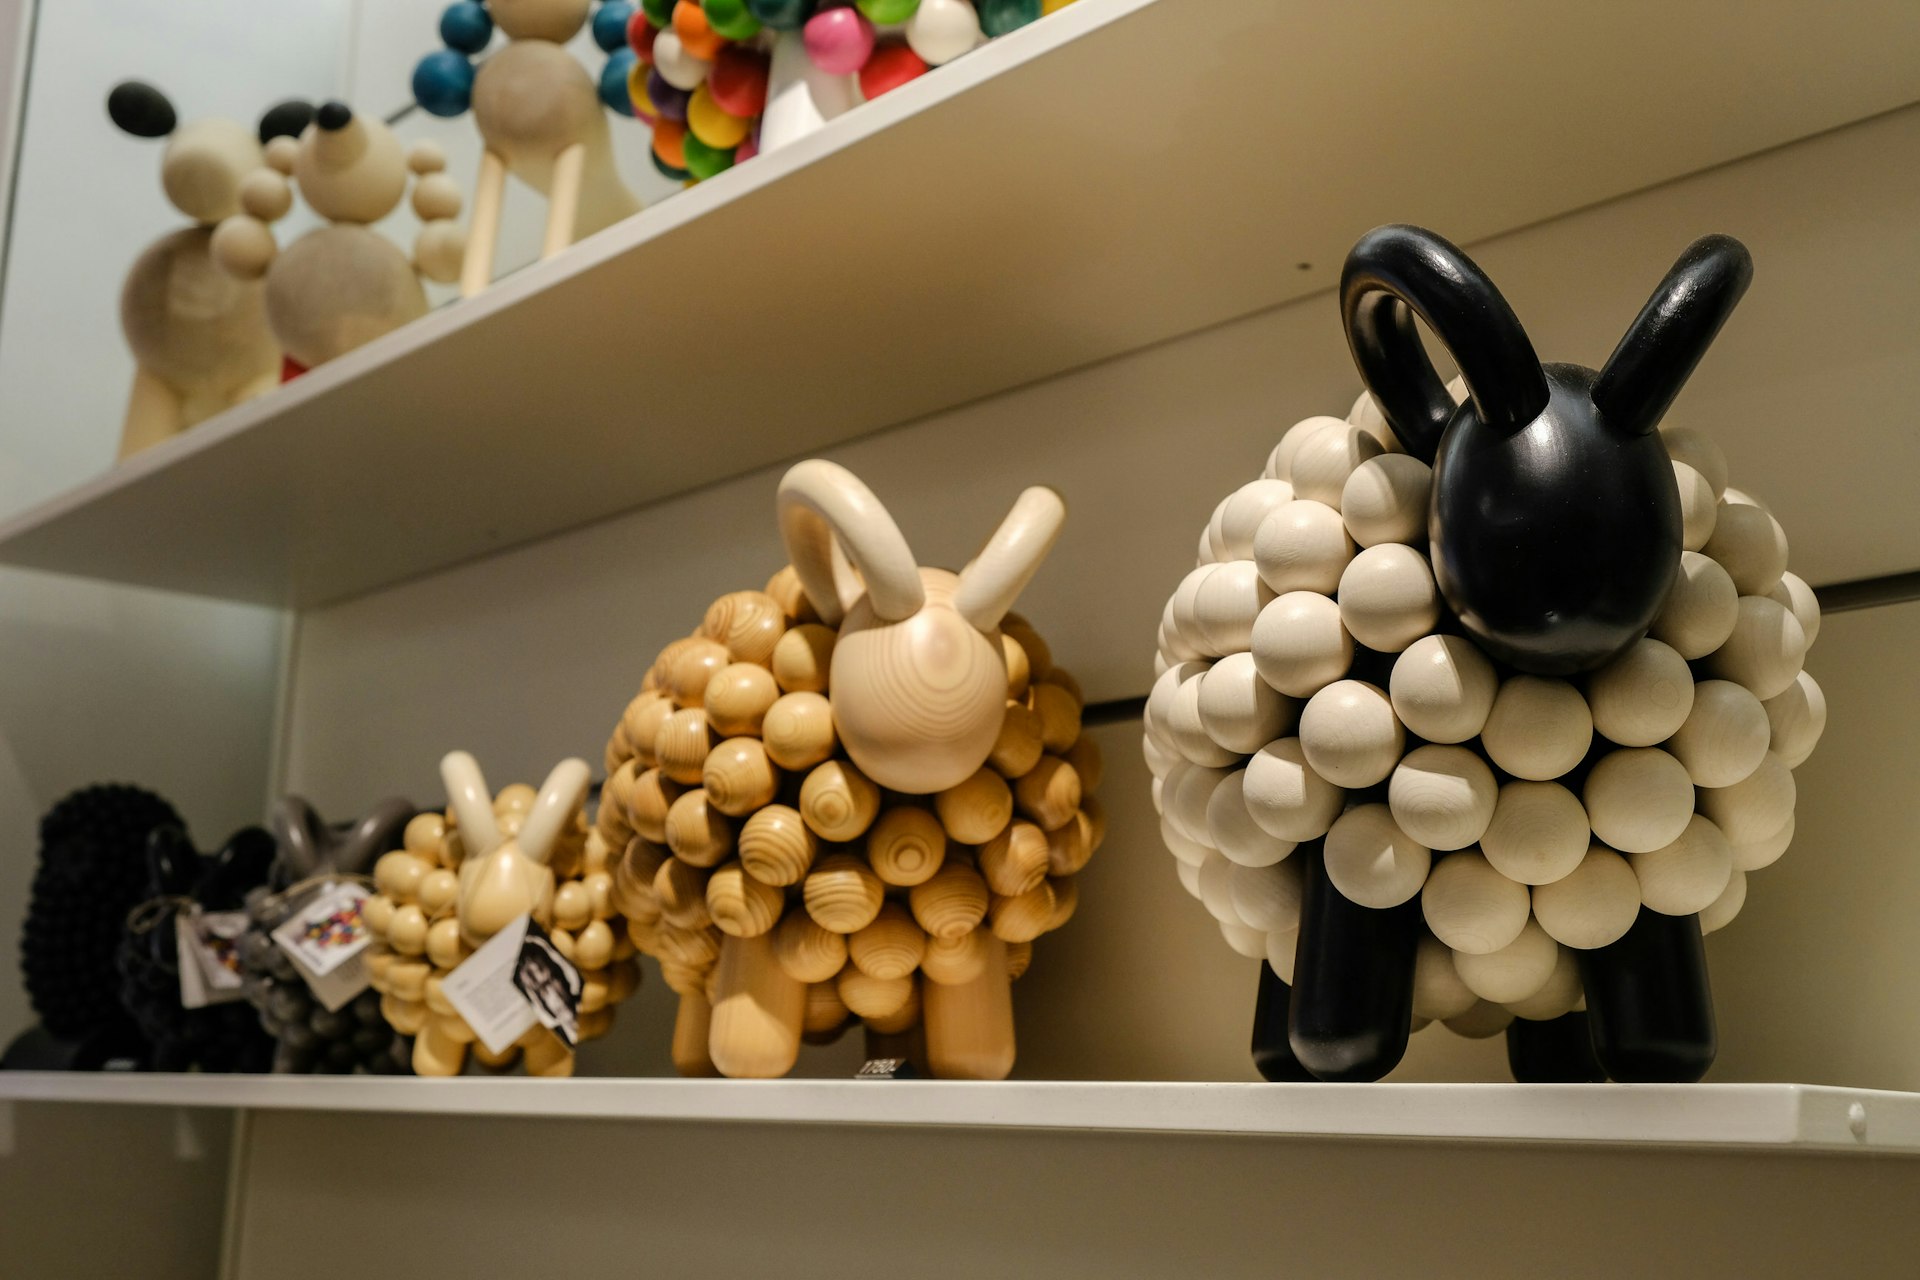 A shelf with sheep ornaments, made from wooden balls, at Aarikka, Helsinki © Tim Bird / Lonely Planet